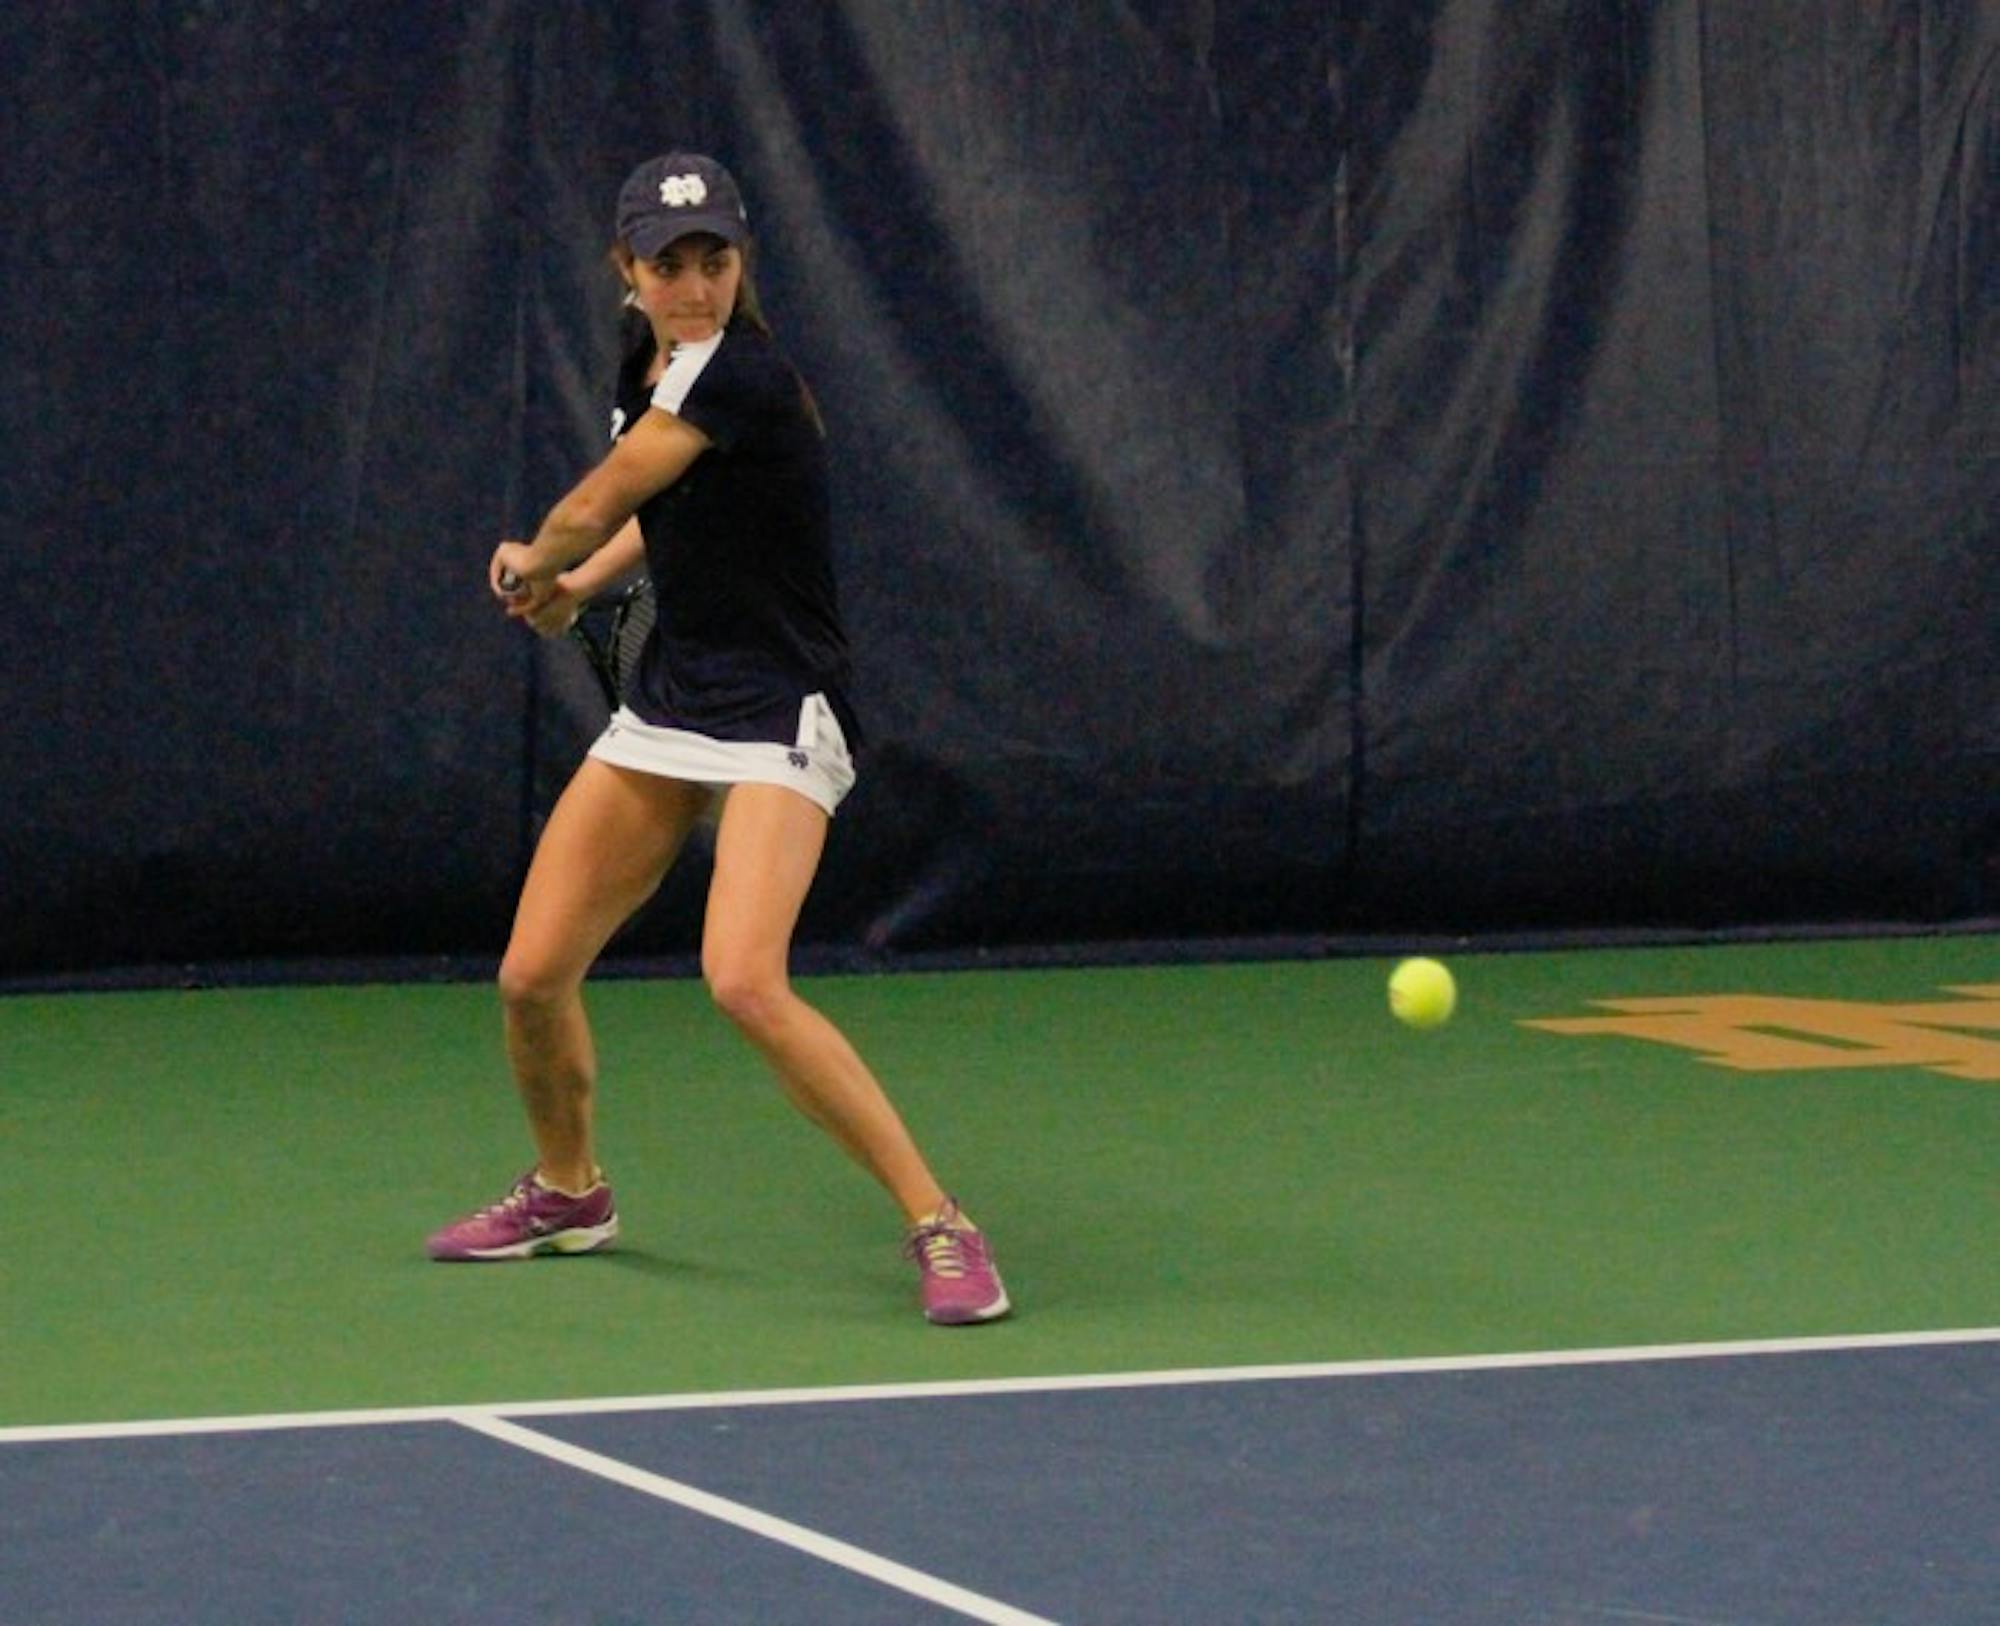 Irish junior Mary Closs positions herself for a backhand during Notre Dame’s 7-0 win over Western Michigan on Jan. 19 at Eck Tennis Pavilion. Closs is 8-7 in singles play this season, as well as 2-2 in doubles play with her primary doubles partner, senior Julie Vrabel.